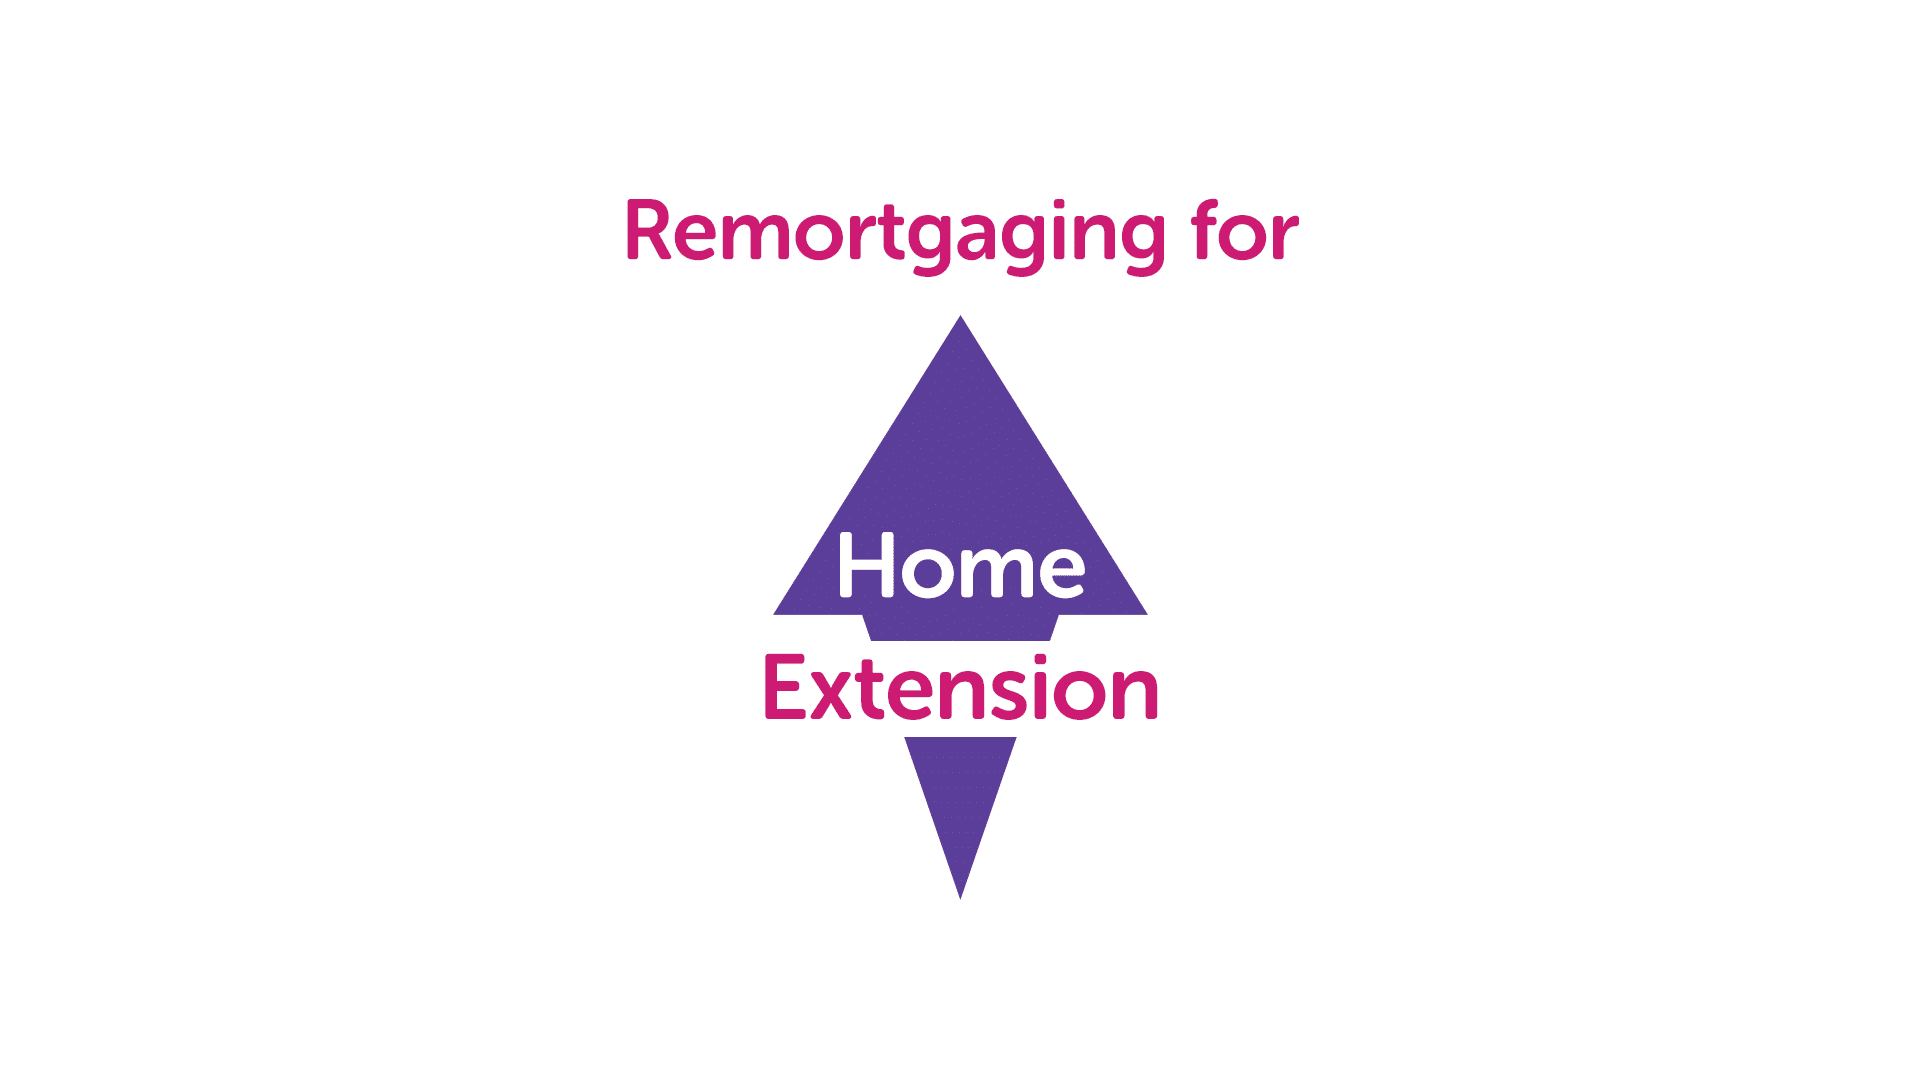 Remortgage in Leicester for a Home Extension